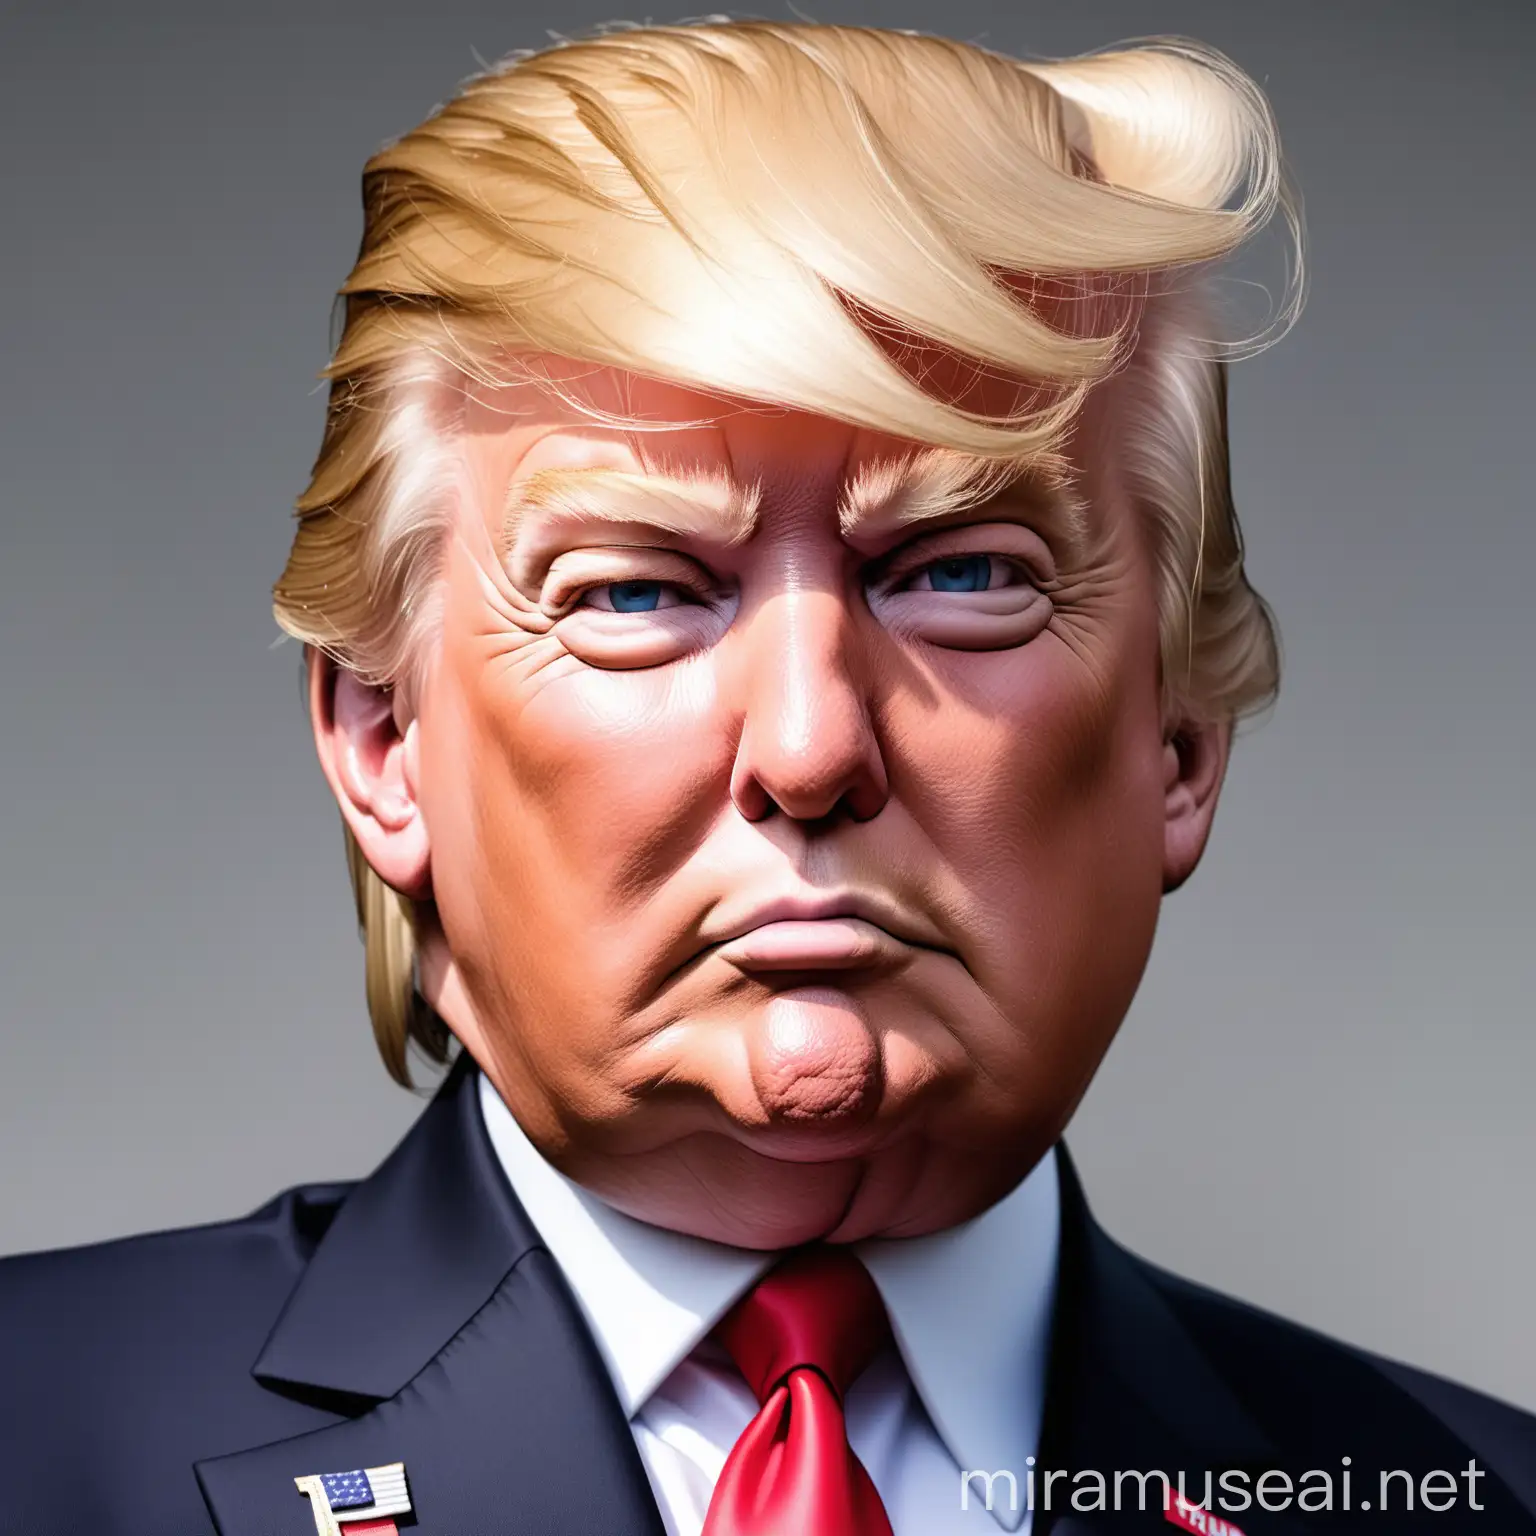 Donald Trump Portrait Former President in Thoughtful Contemplation